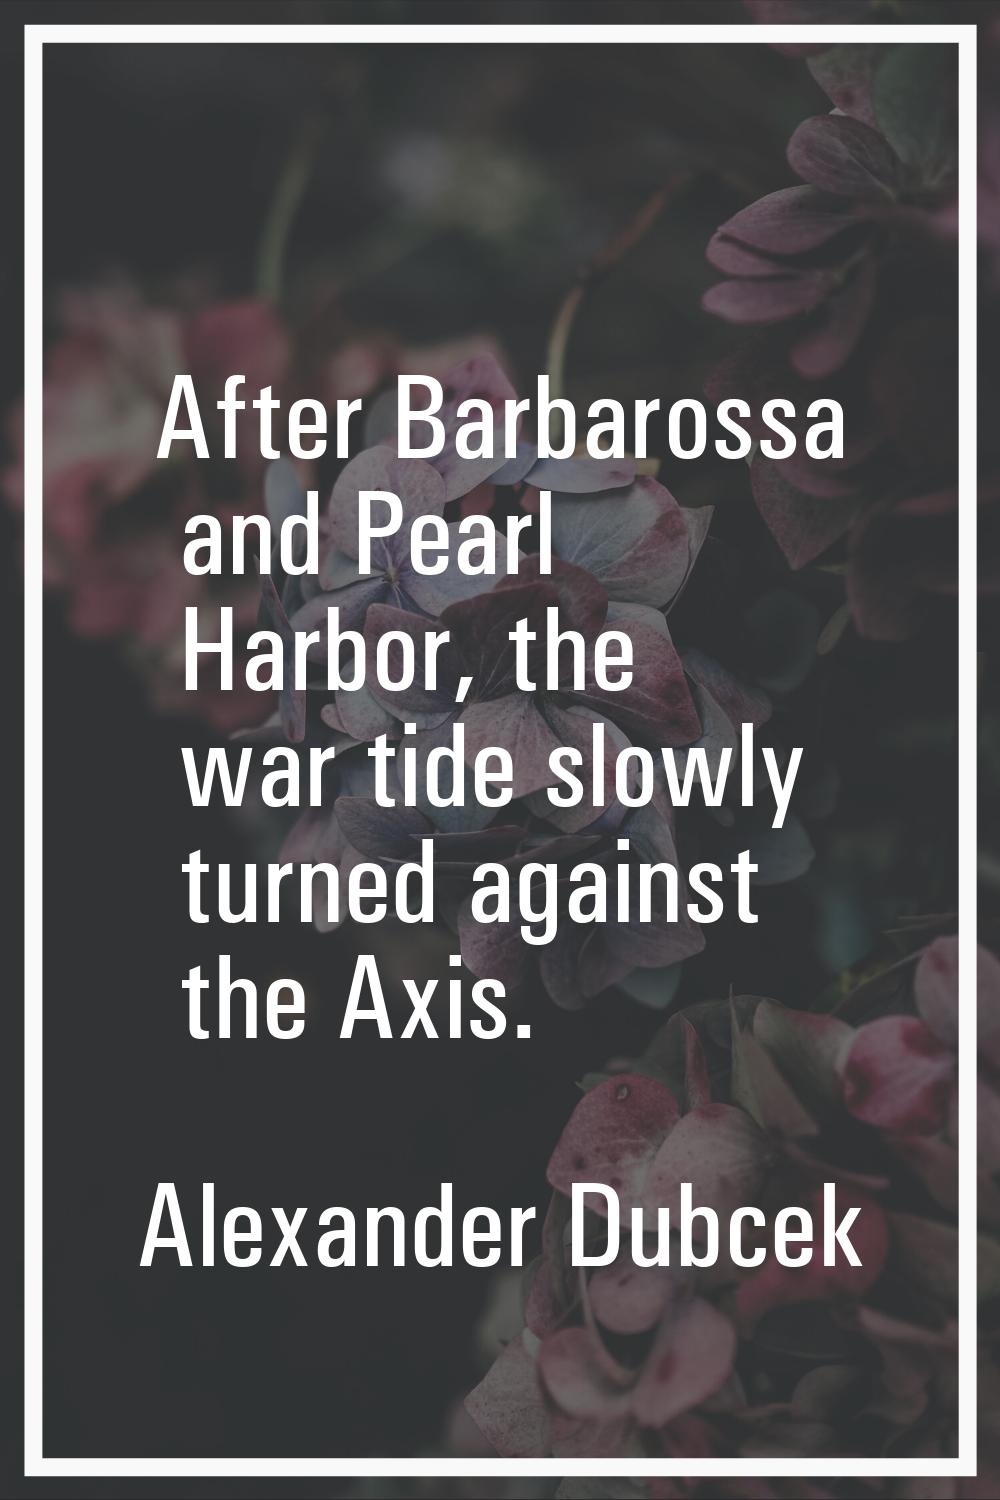 After Barbarossa and Pearl Harbor, the war tide slowly turned against the Axis.